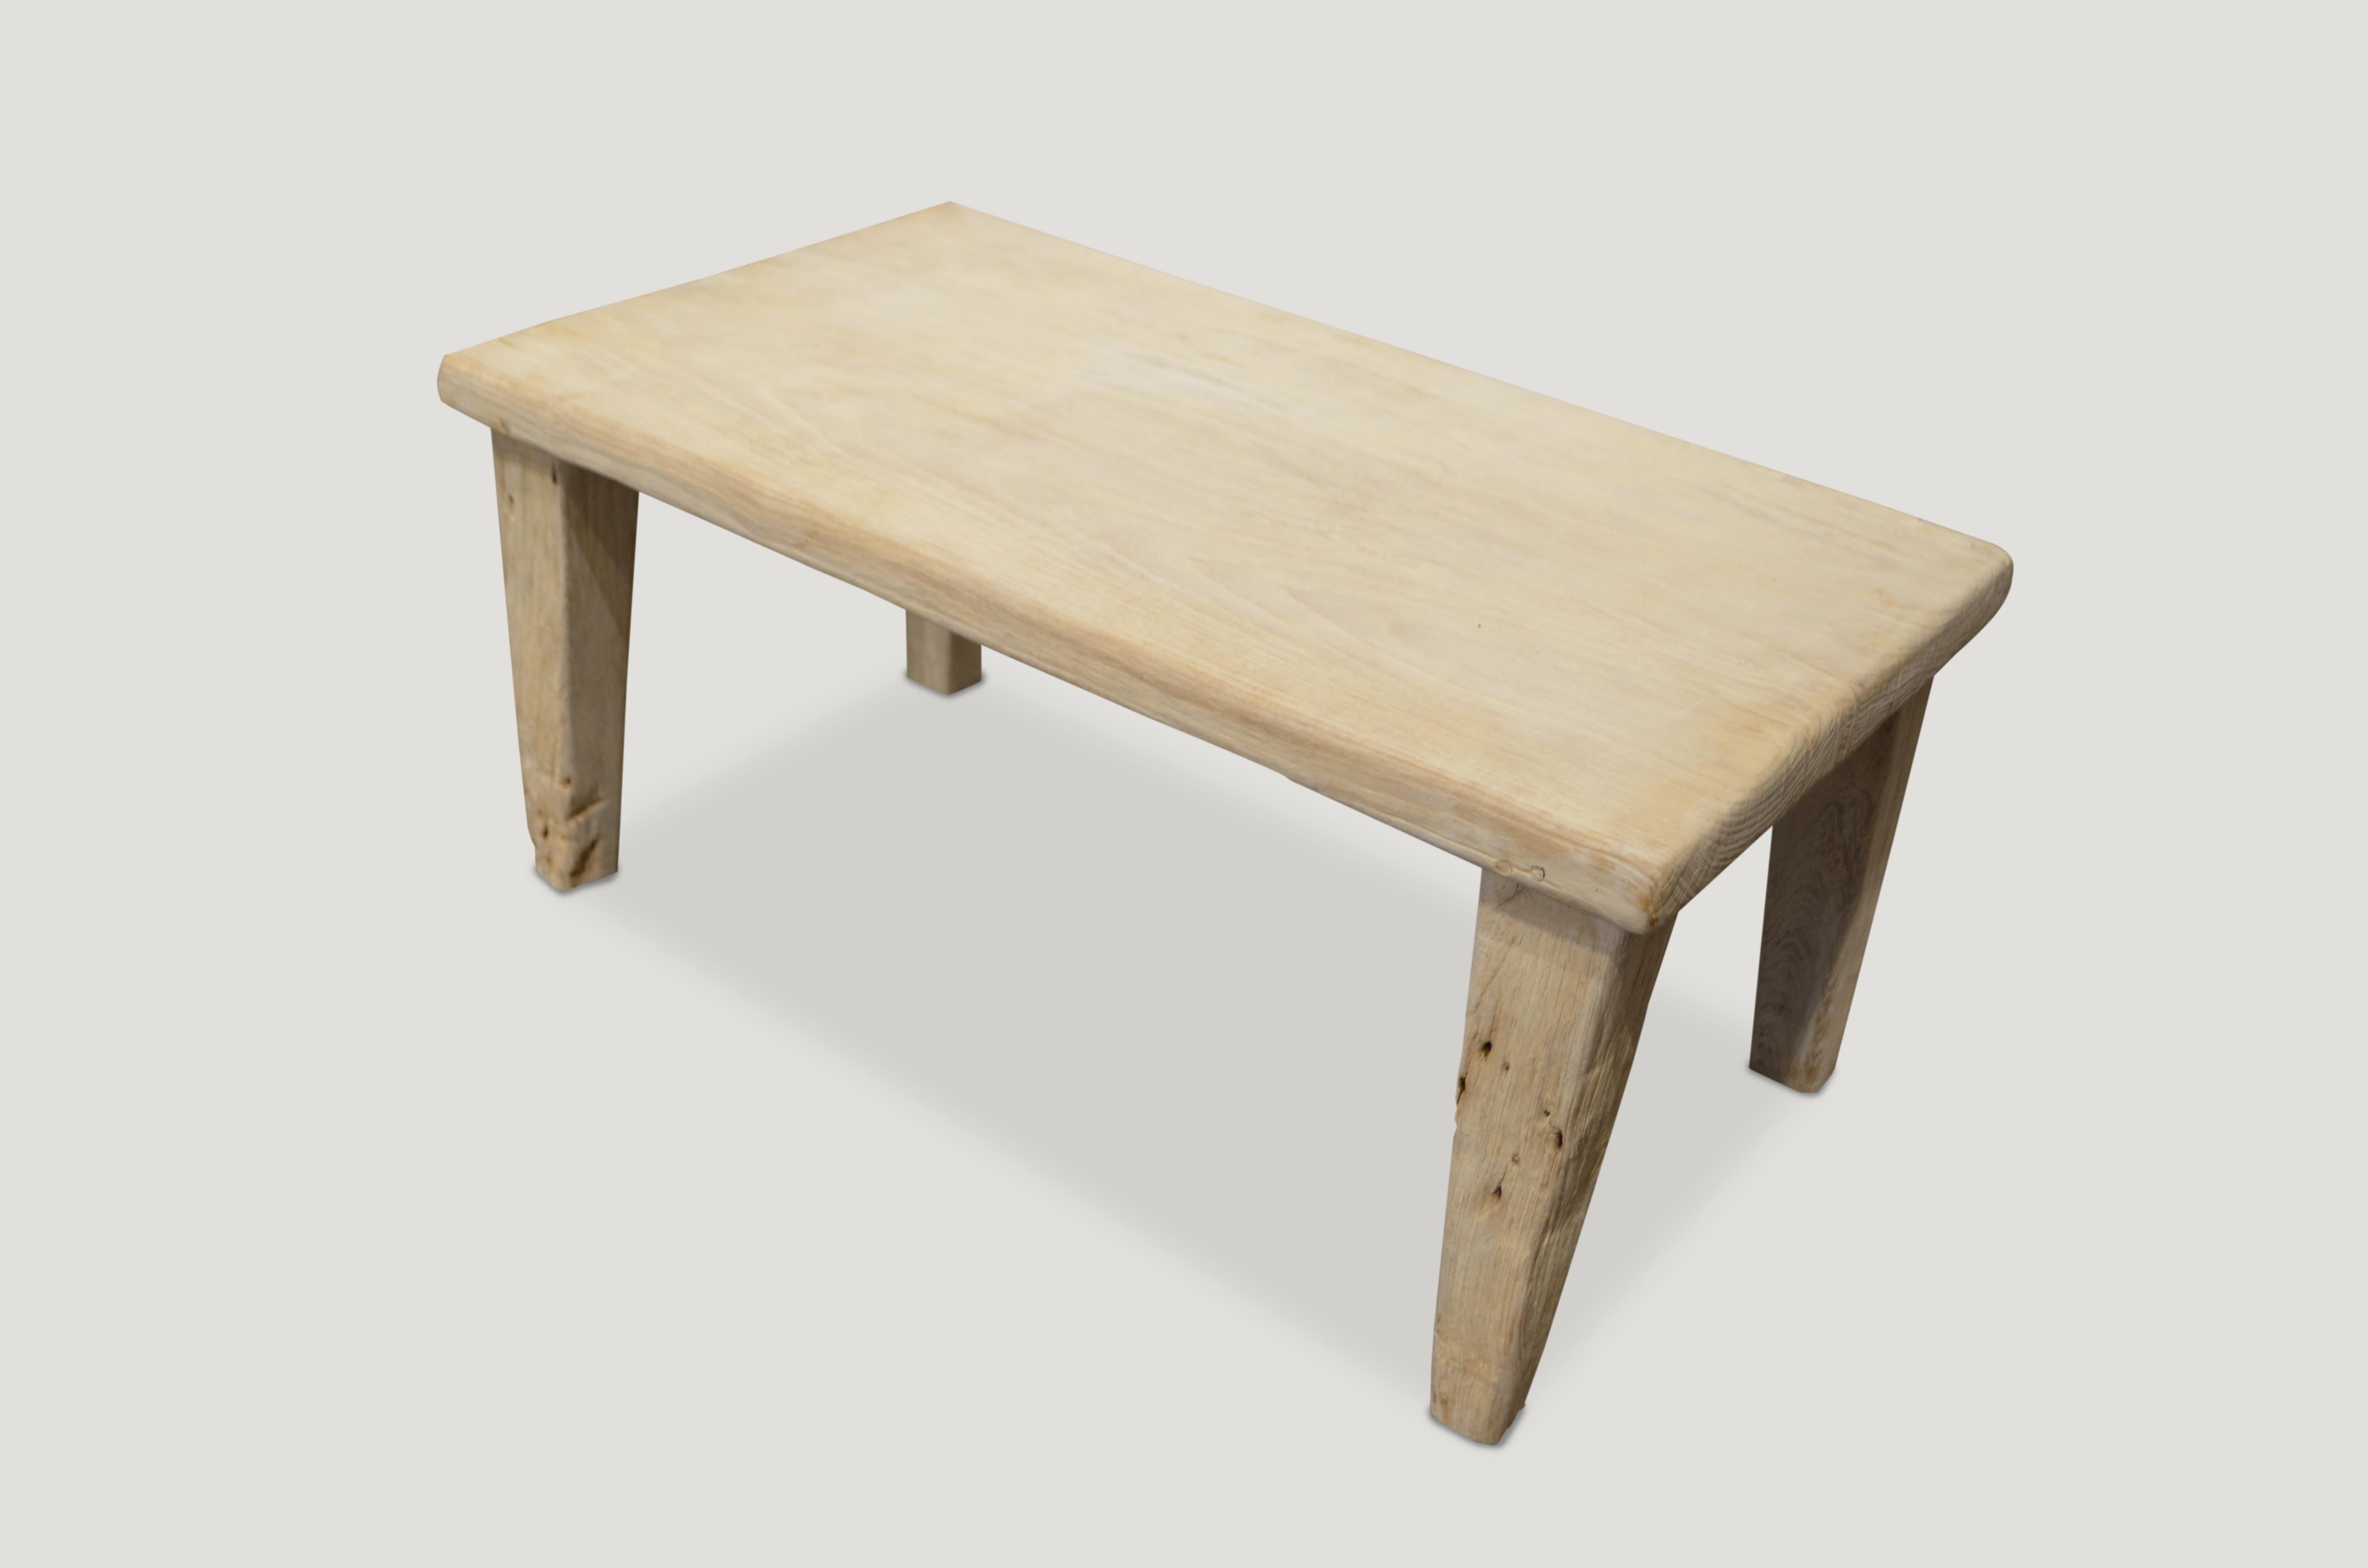 Reclaimed single slab bleached teak wood coffee table, side table or bench. We added a light white wash finish. Perfect for inside or outside living.

The St. Barts collection features an exciting new line of organic white wash and natural